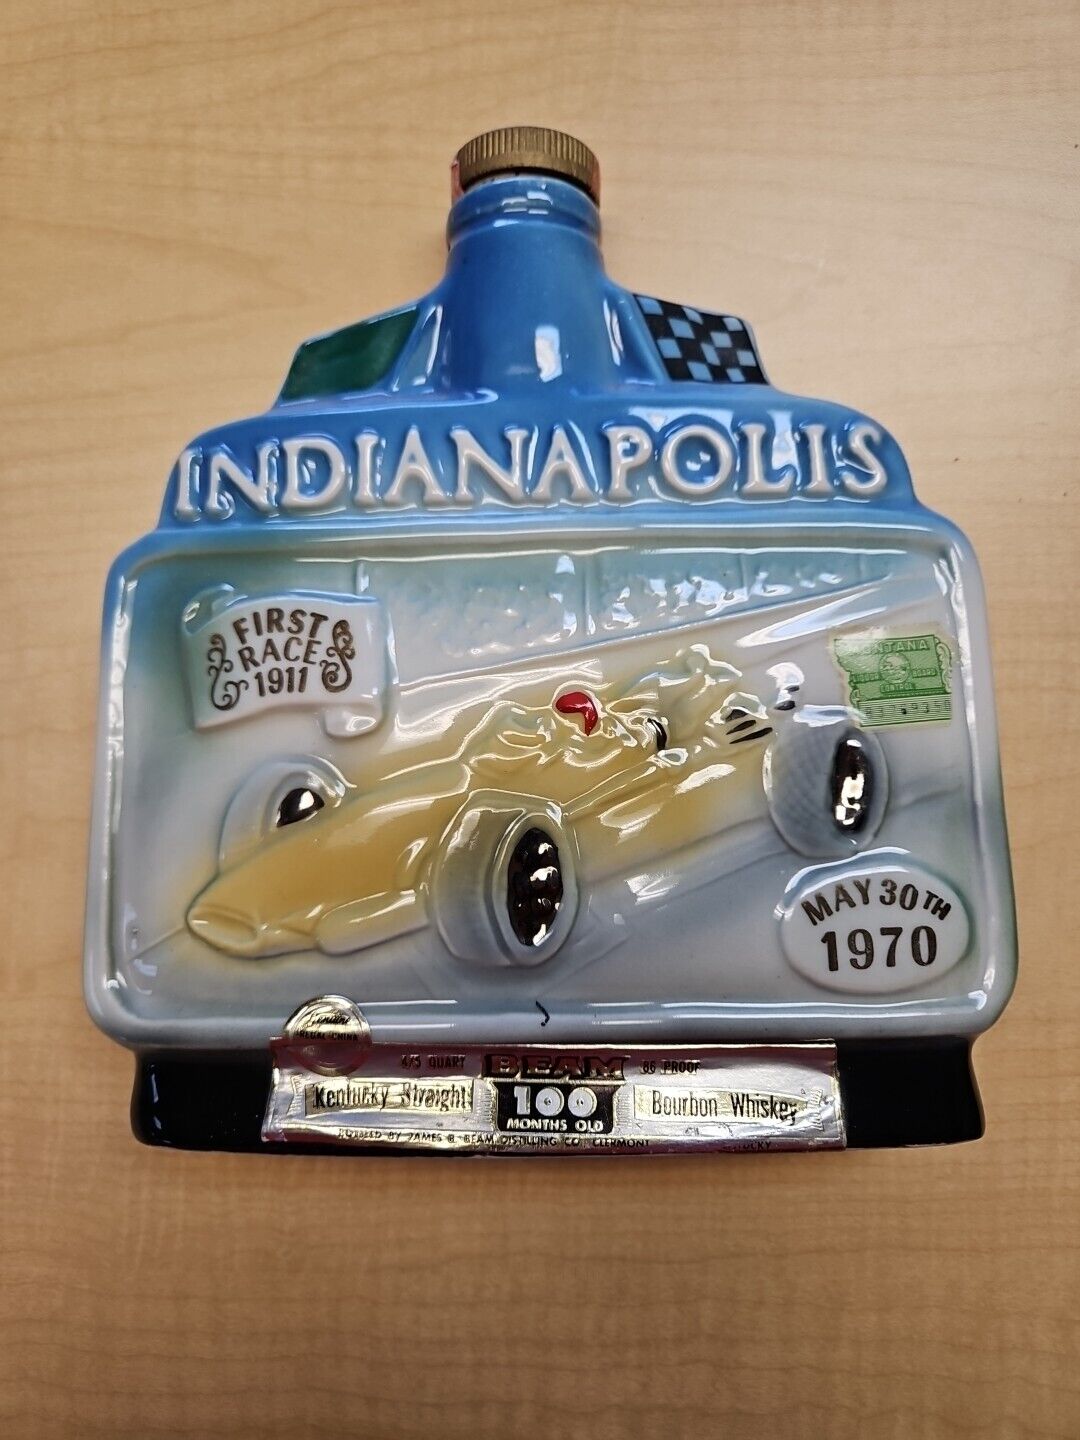 Vintage Jim Beam Indianapolis Motor Speedway 54th Indy 500 Race Decanter Bottle 